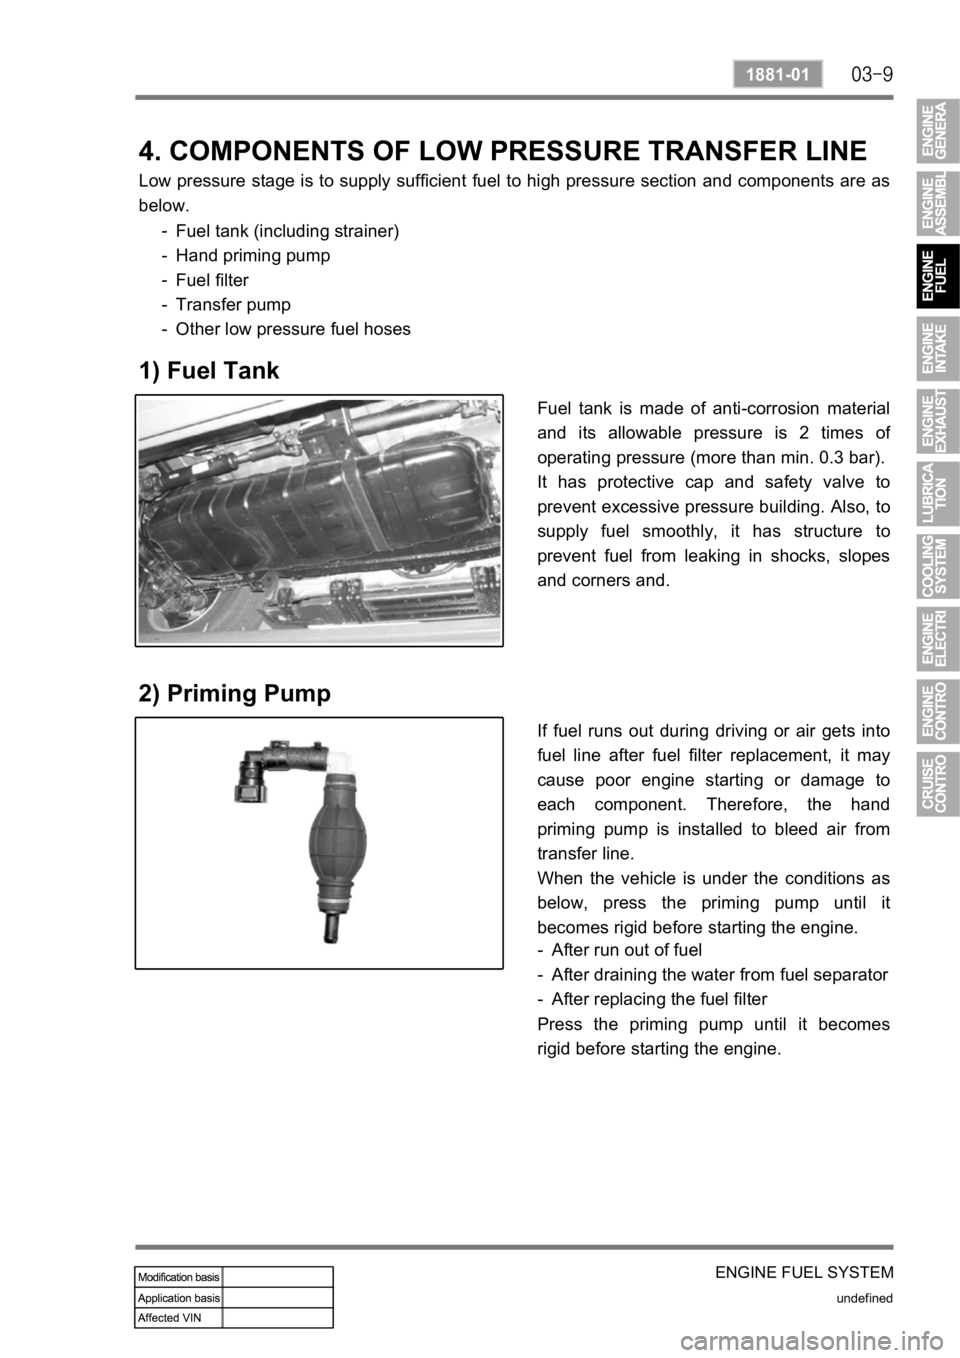 SSANGYONG KYRON 2010  Service Manual ENGINE FUEL SYSTEM
undefined
1881-01
4. COMPONENTS OF LOW PRESSURE TRANSFER LINE
Low pressure stage is to supply sufficient  fuel to high pressure section  and components are as 
below.
Fuel tank (inc